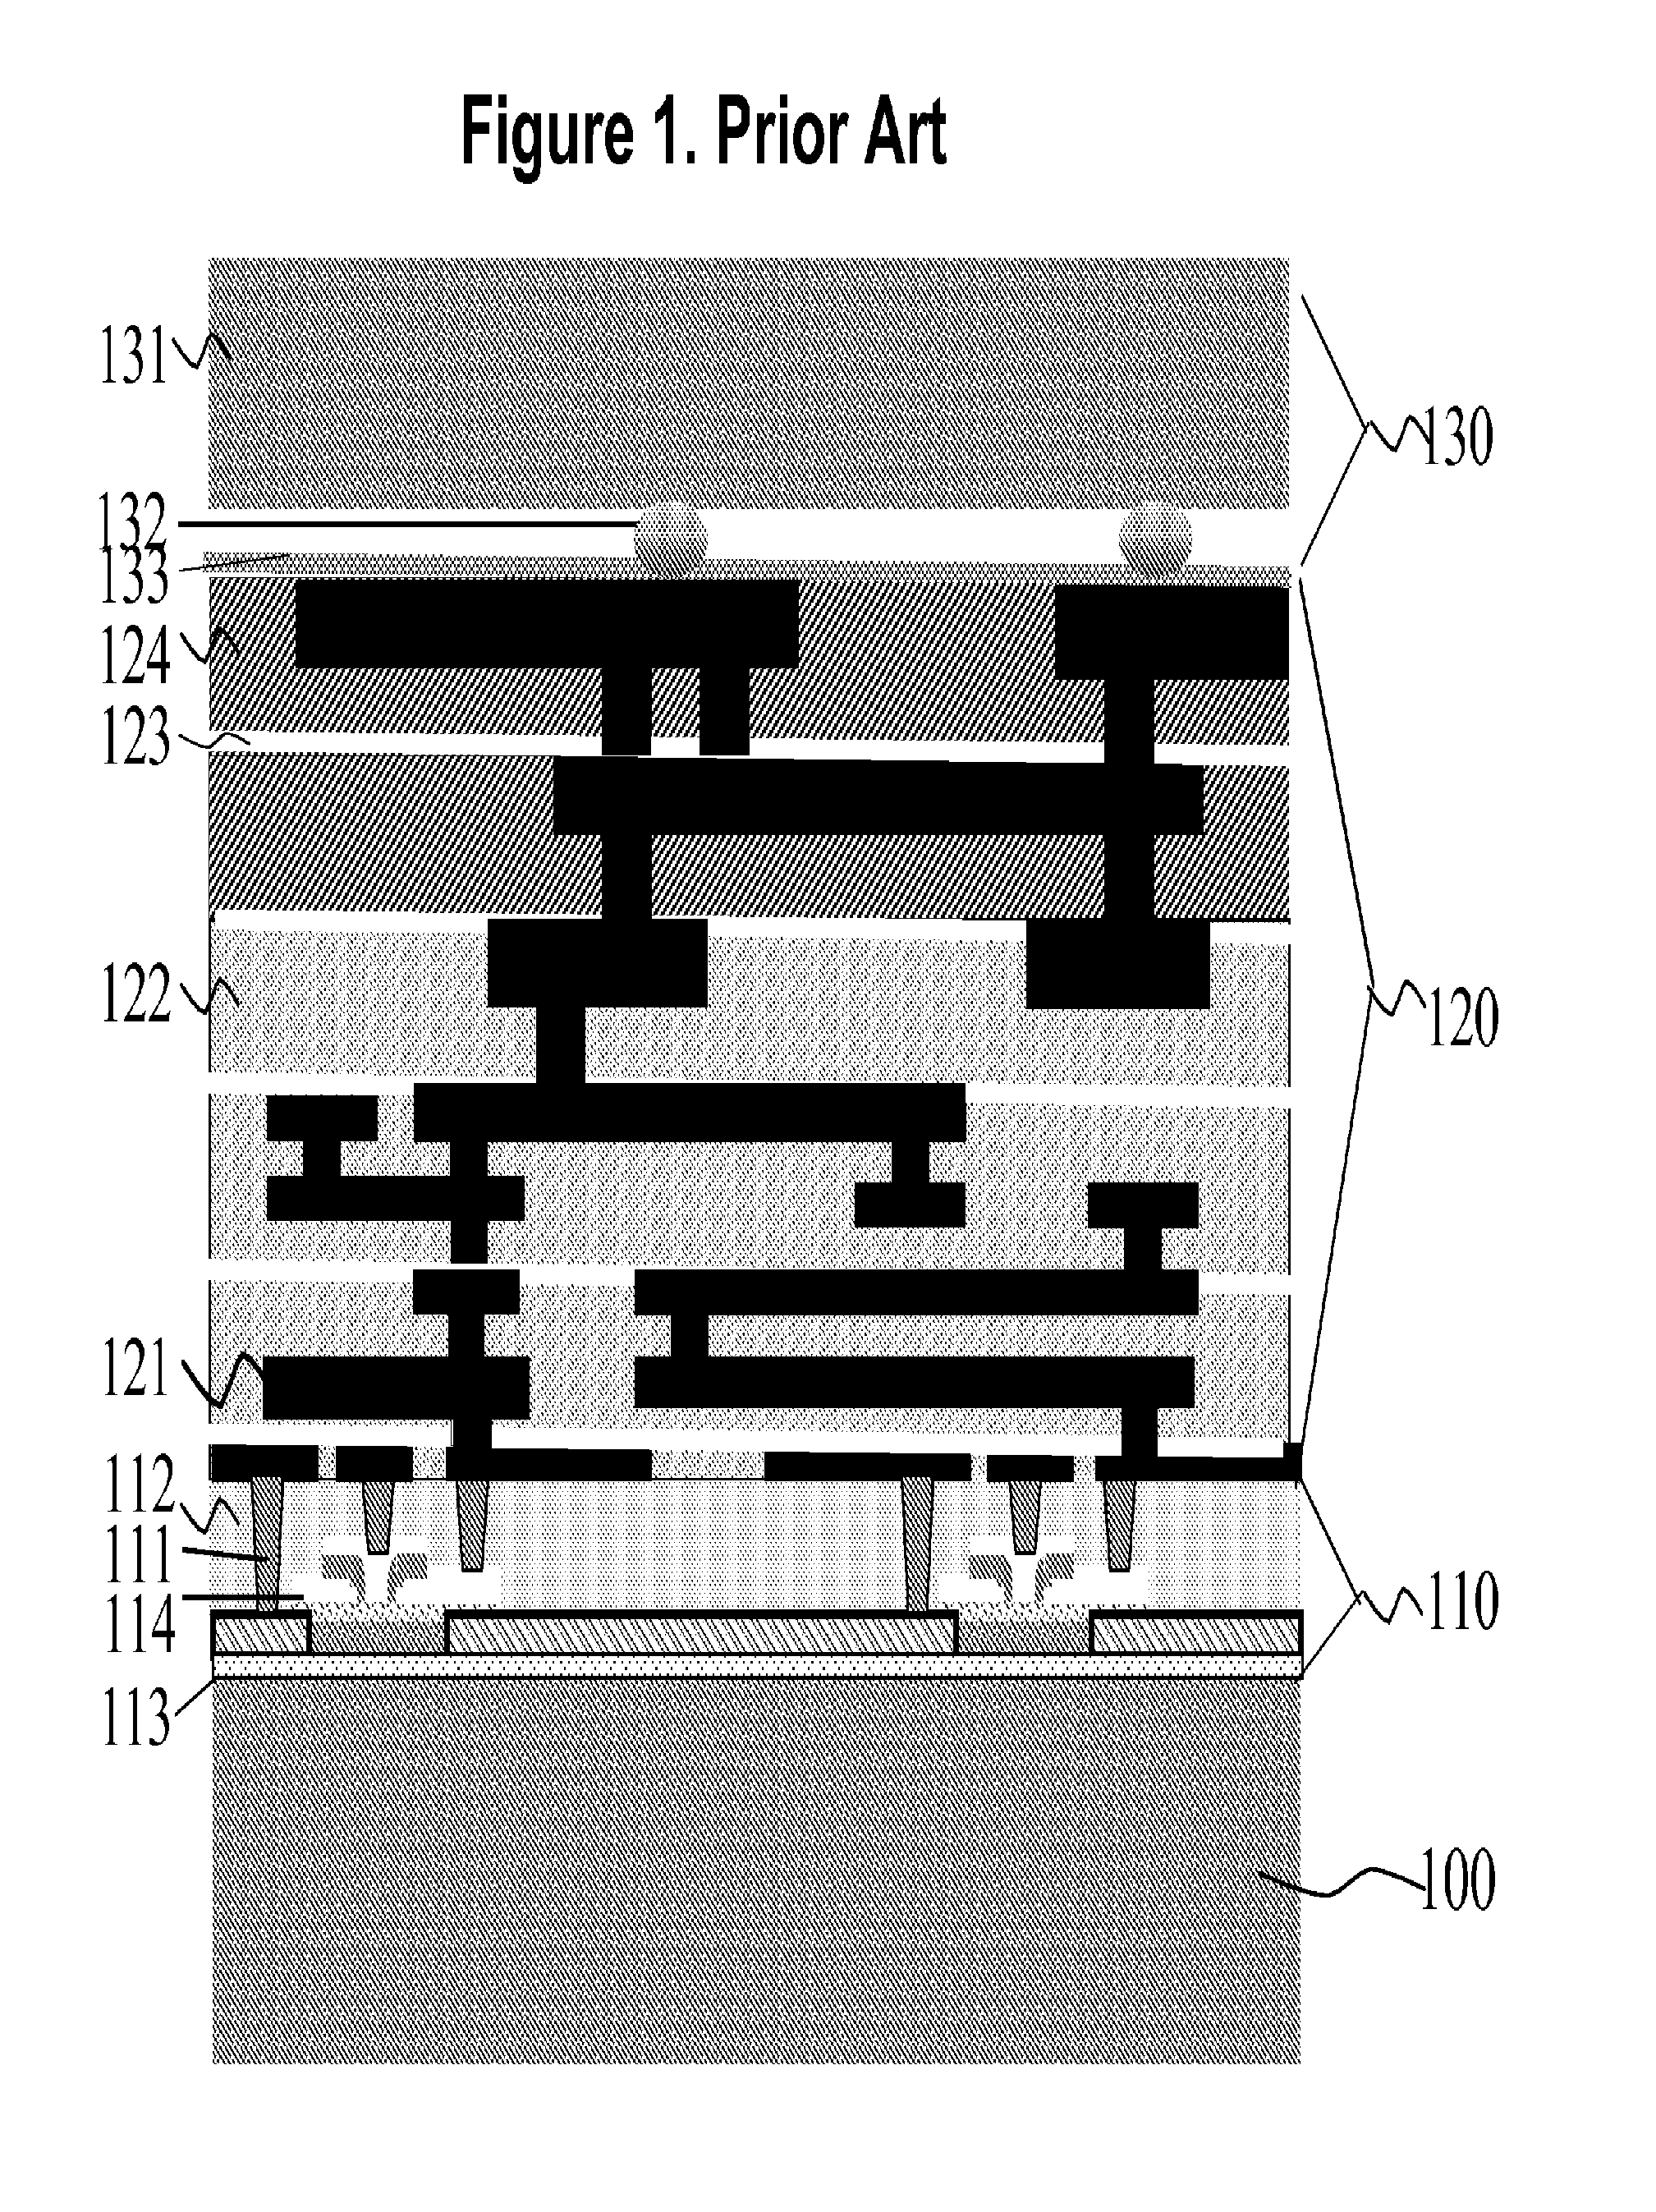 Layer transfer process and functionally enhanced integrated circuits produced thereby